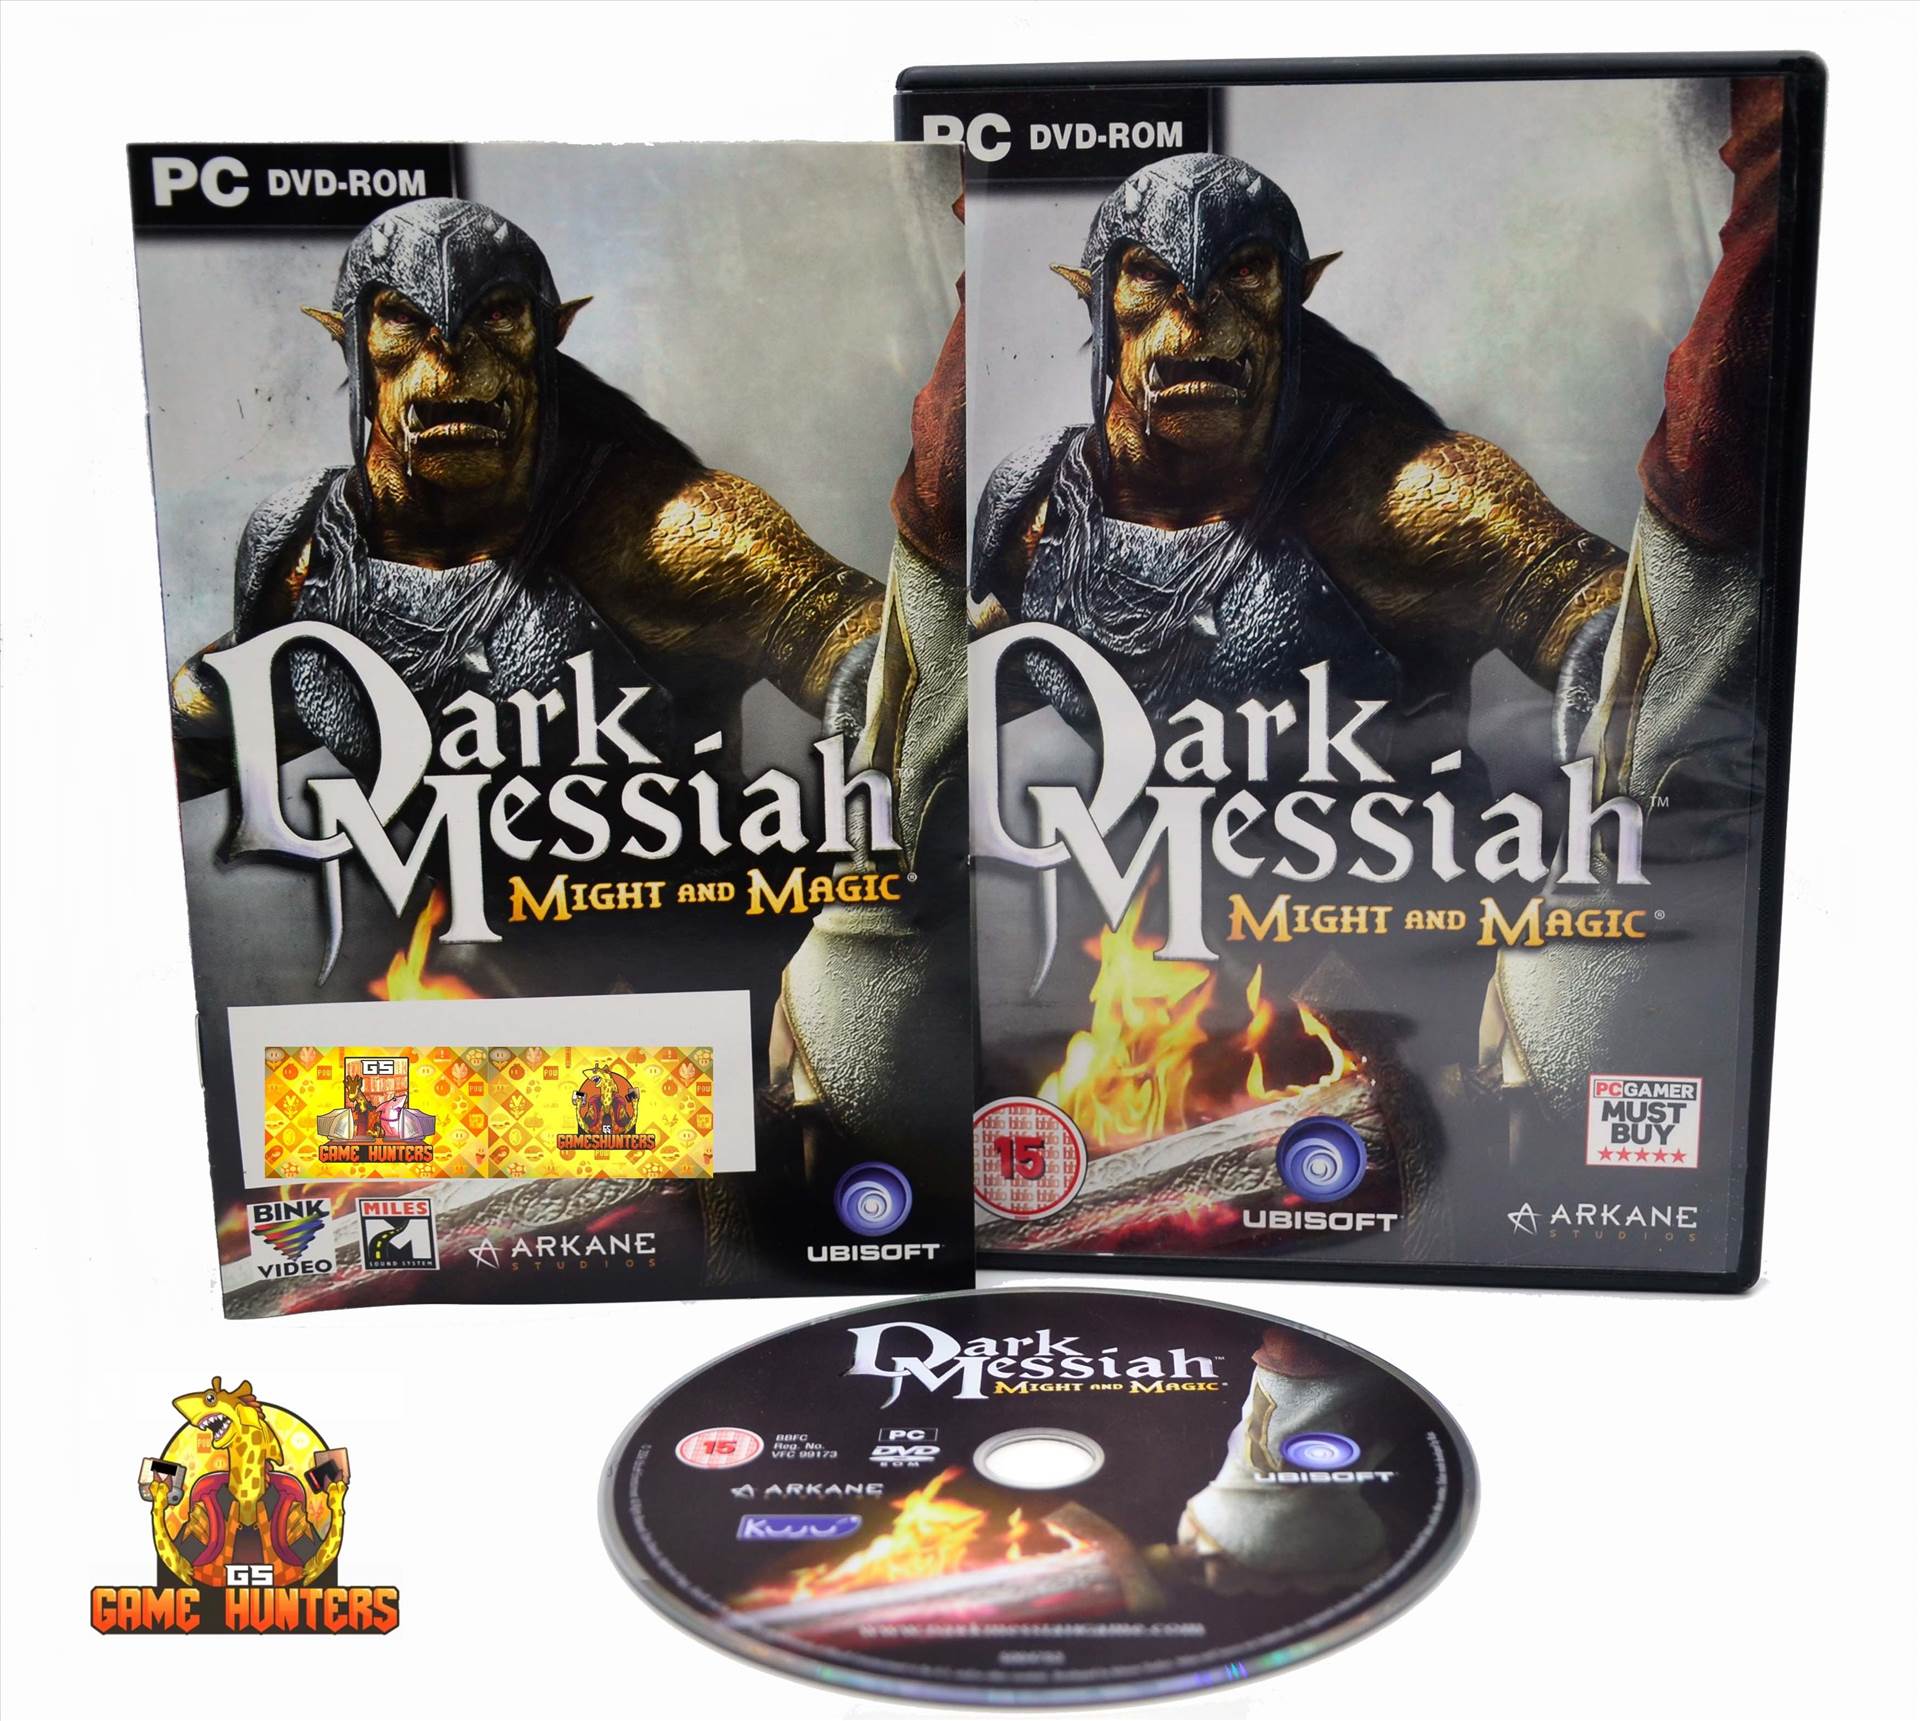 Dark Messiah Might and Magic Case, Manual (product key obscured) & Disc.jpg  by GSGAMEHUNTERS